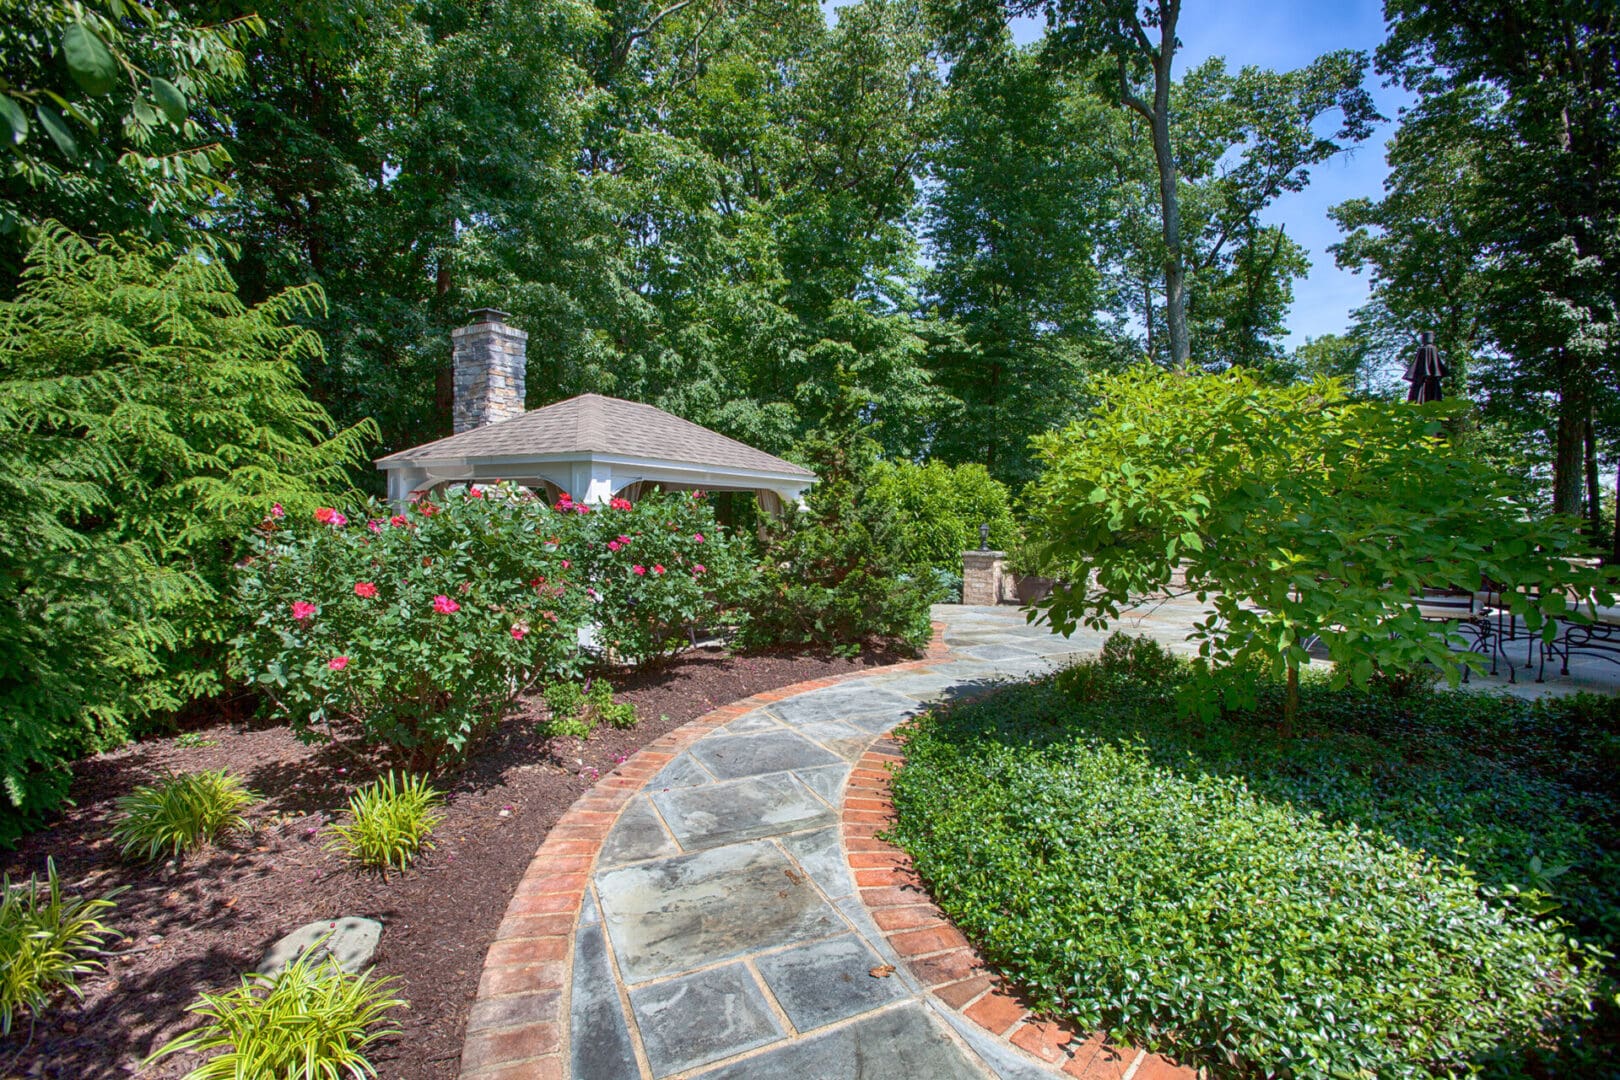 A stone walkway leads to a gazebo in a garden designed by Planting Professionals.